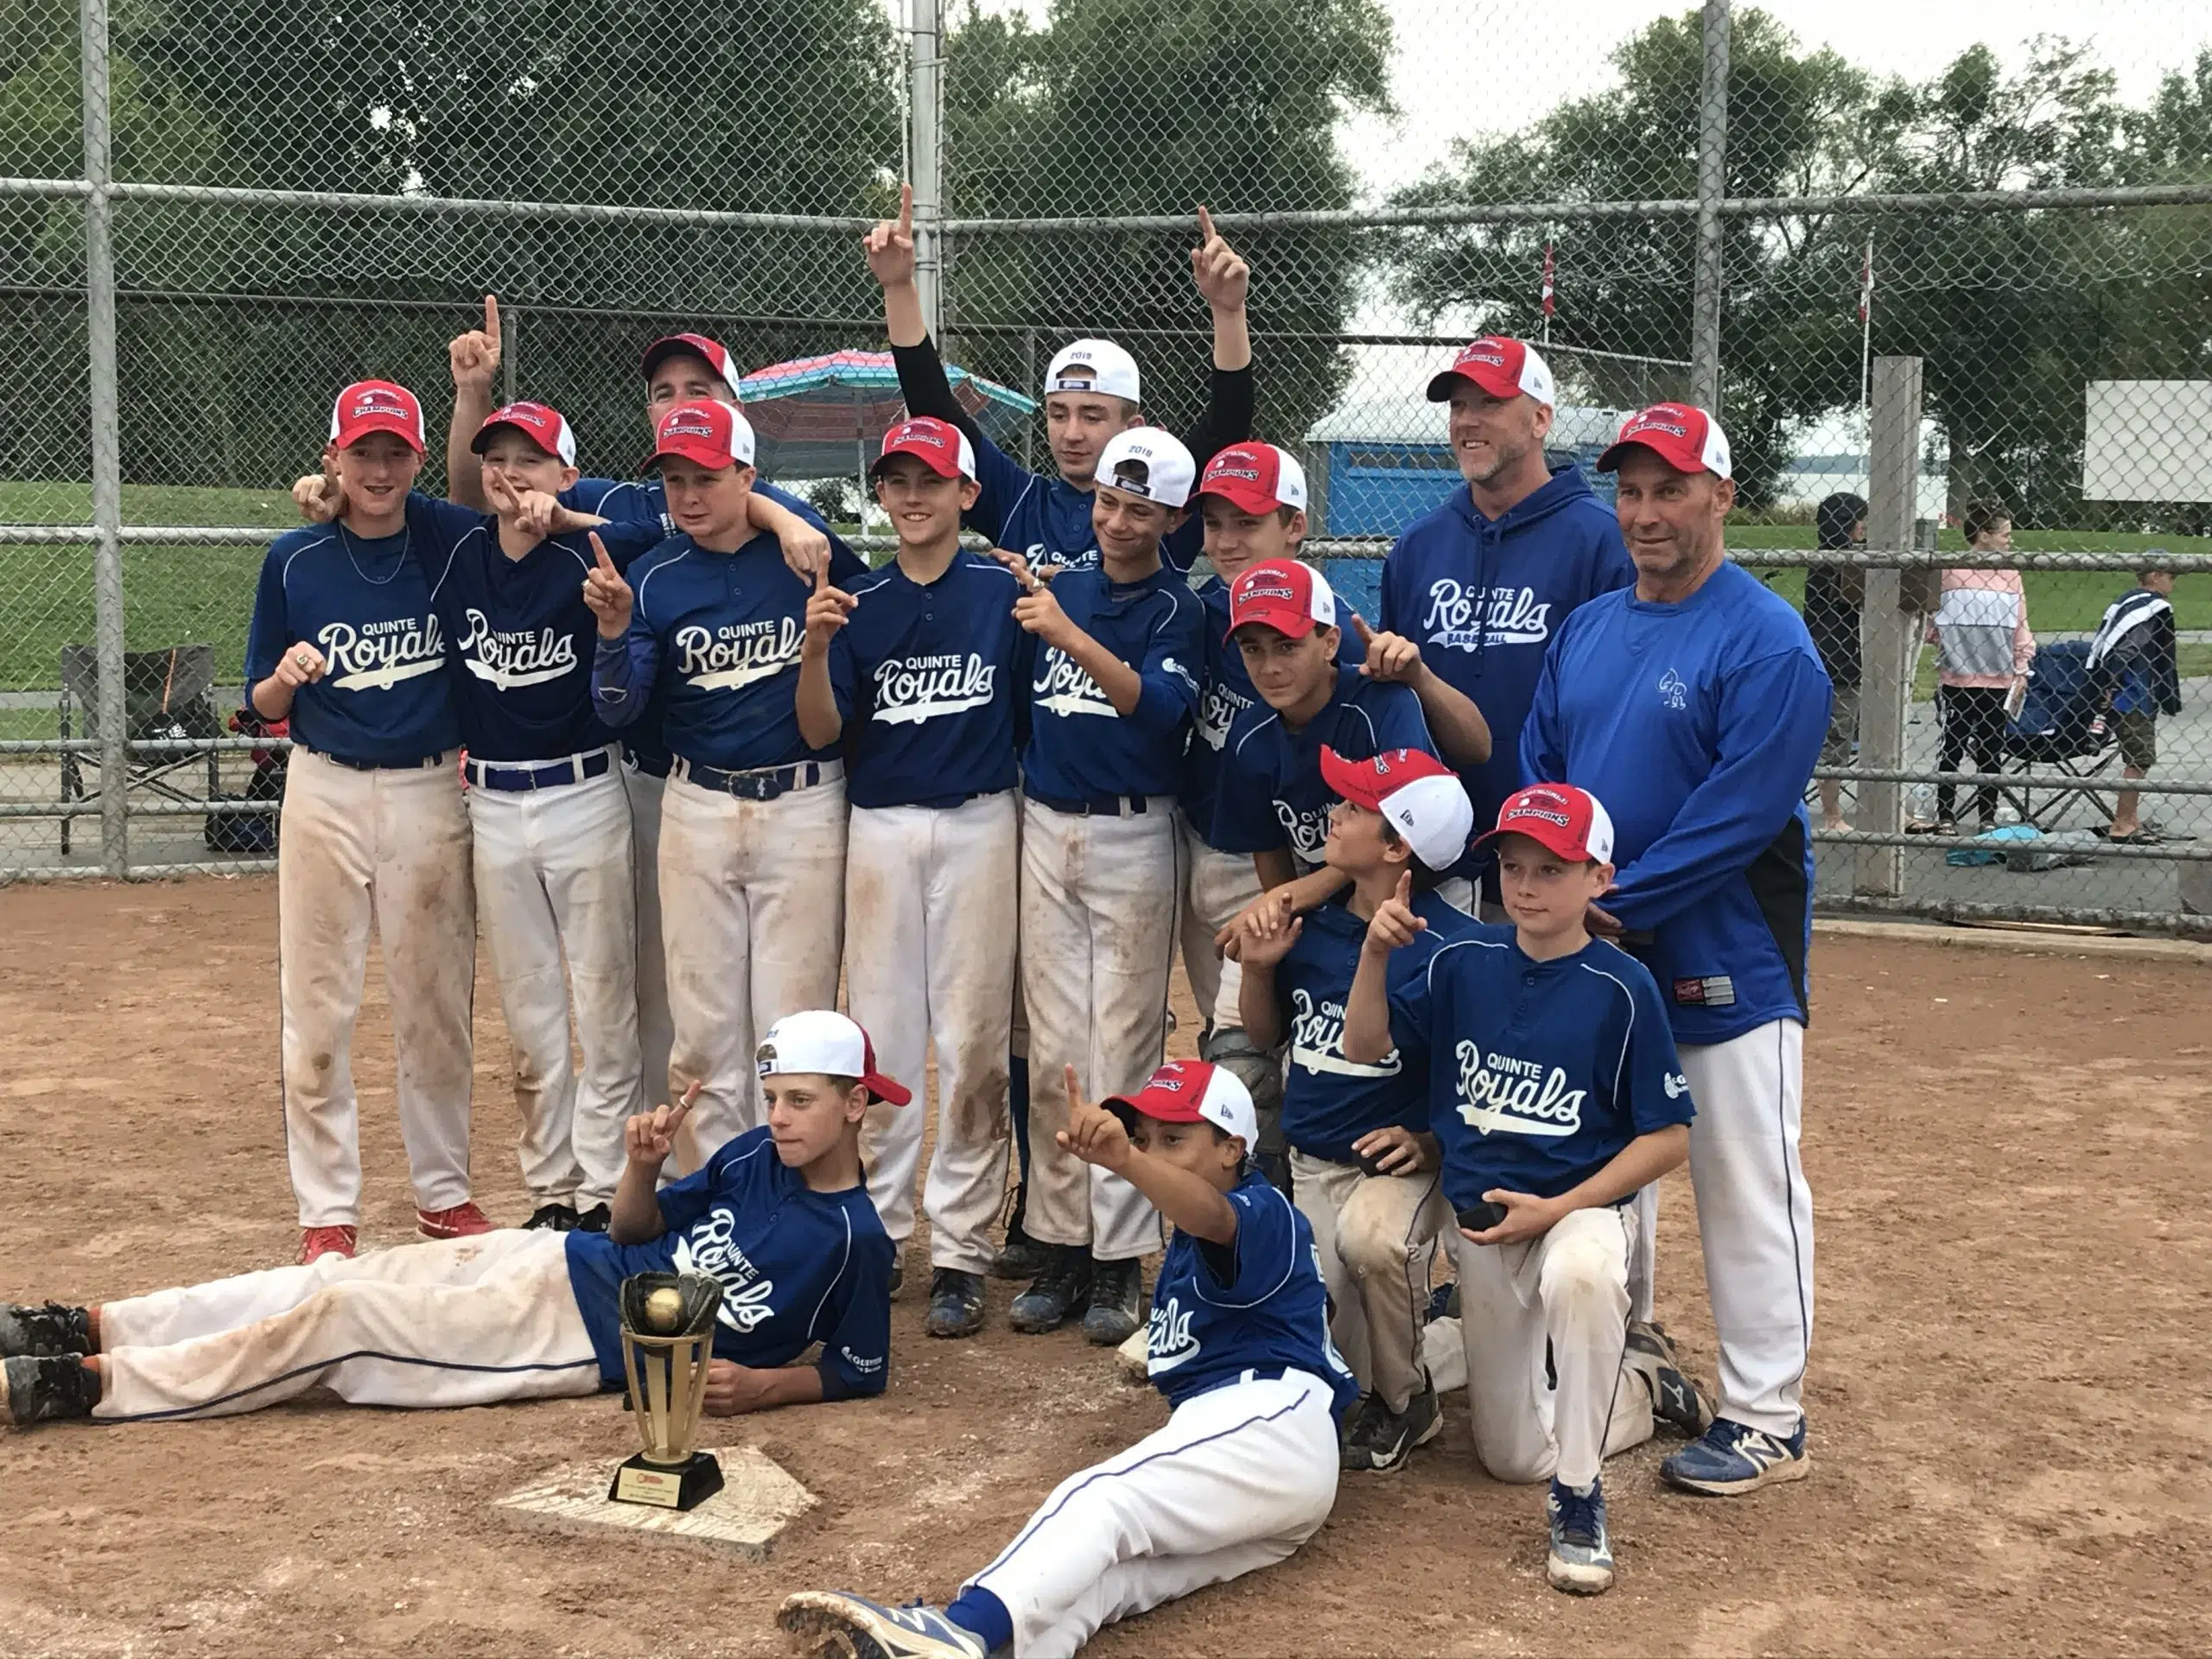 Royals crowned Provincial champs